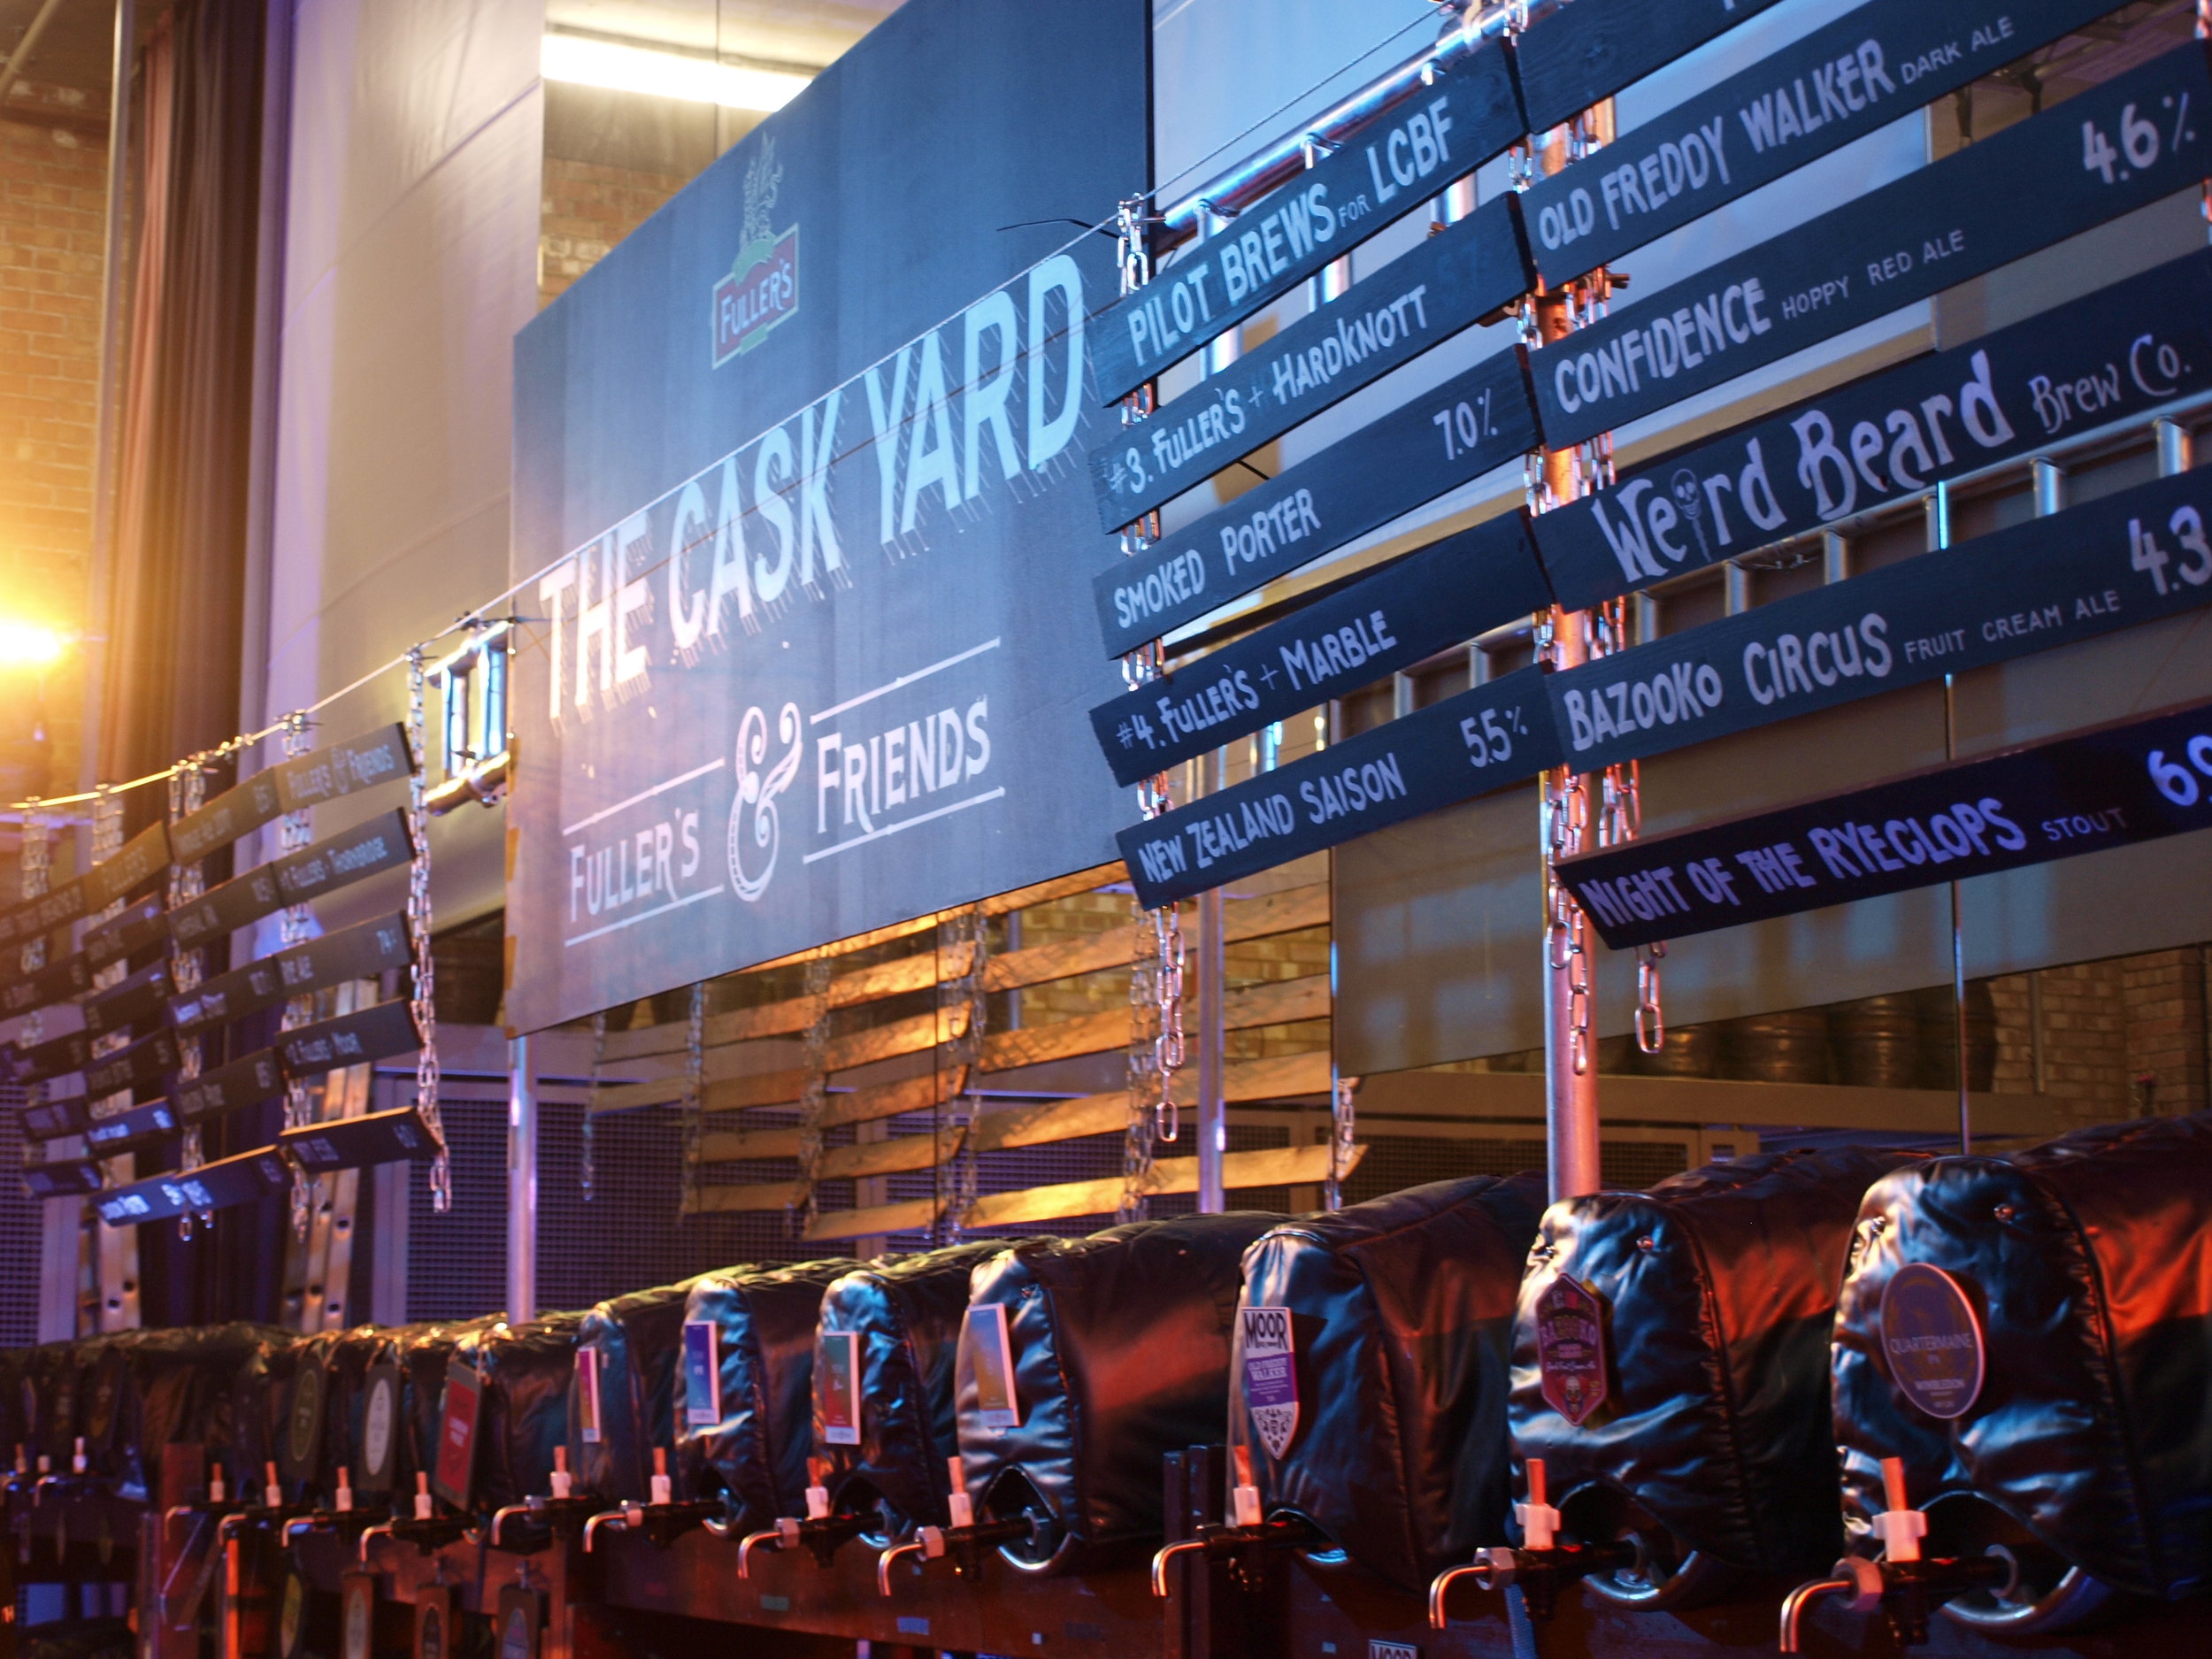 A Londoner’s Review of the London Craft Beer Festival